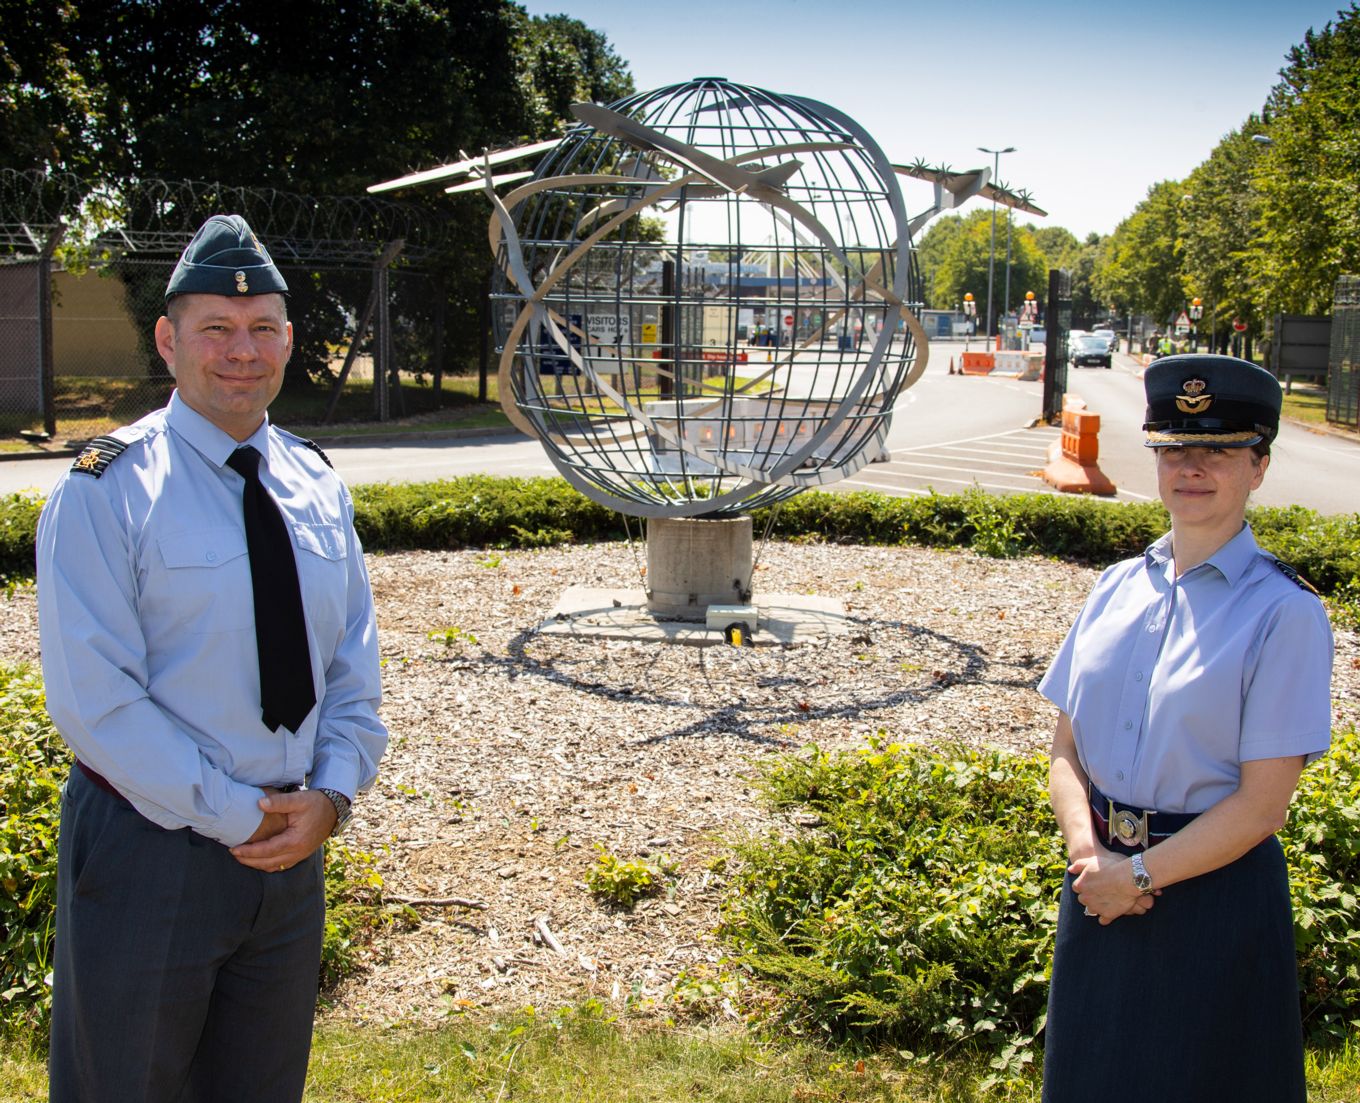 Pictured, Group Captain Dan James and Group Captain Emily Flynn